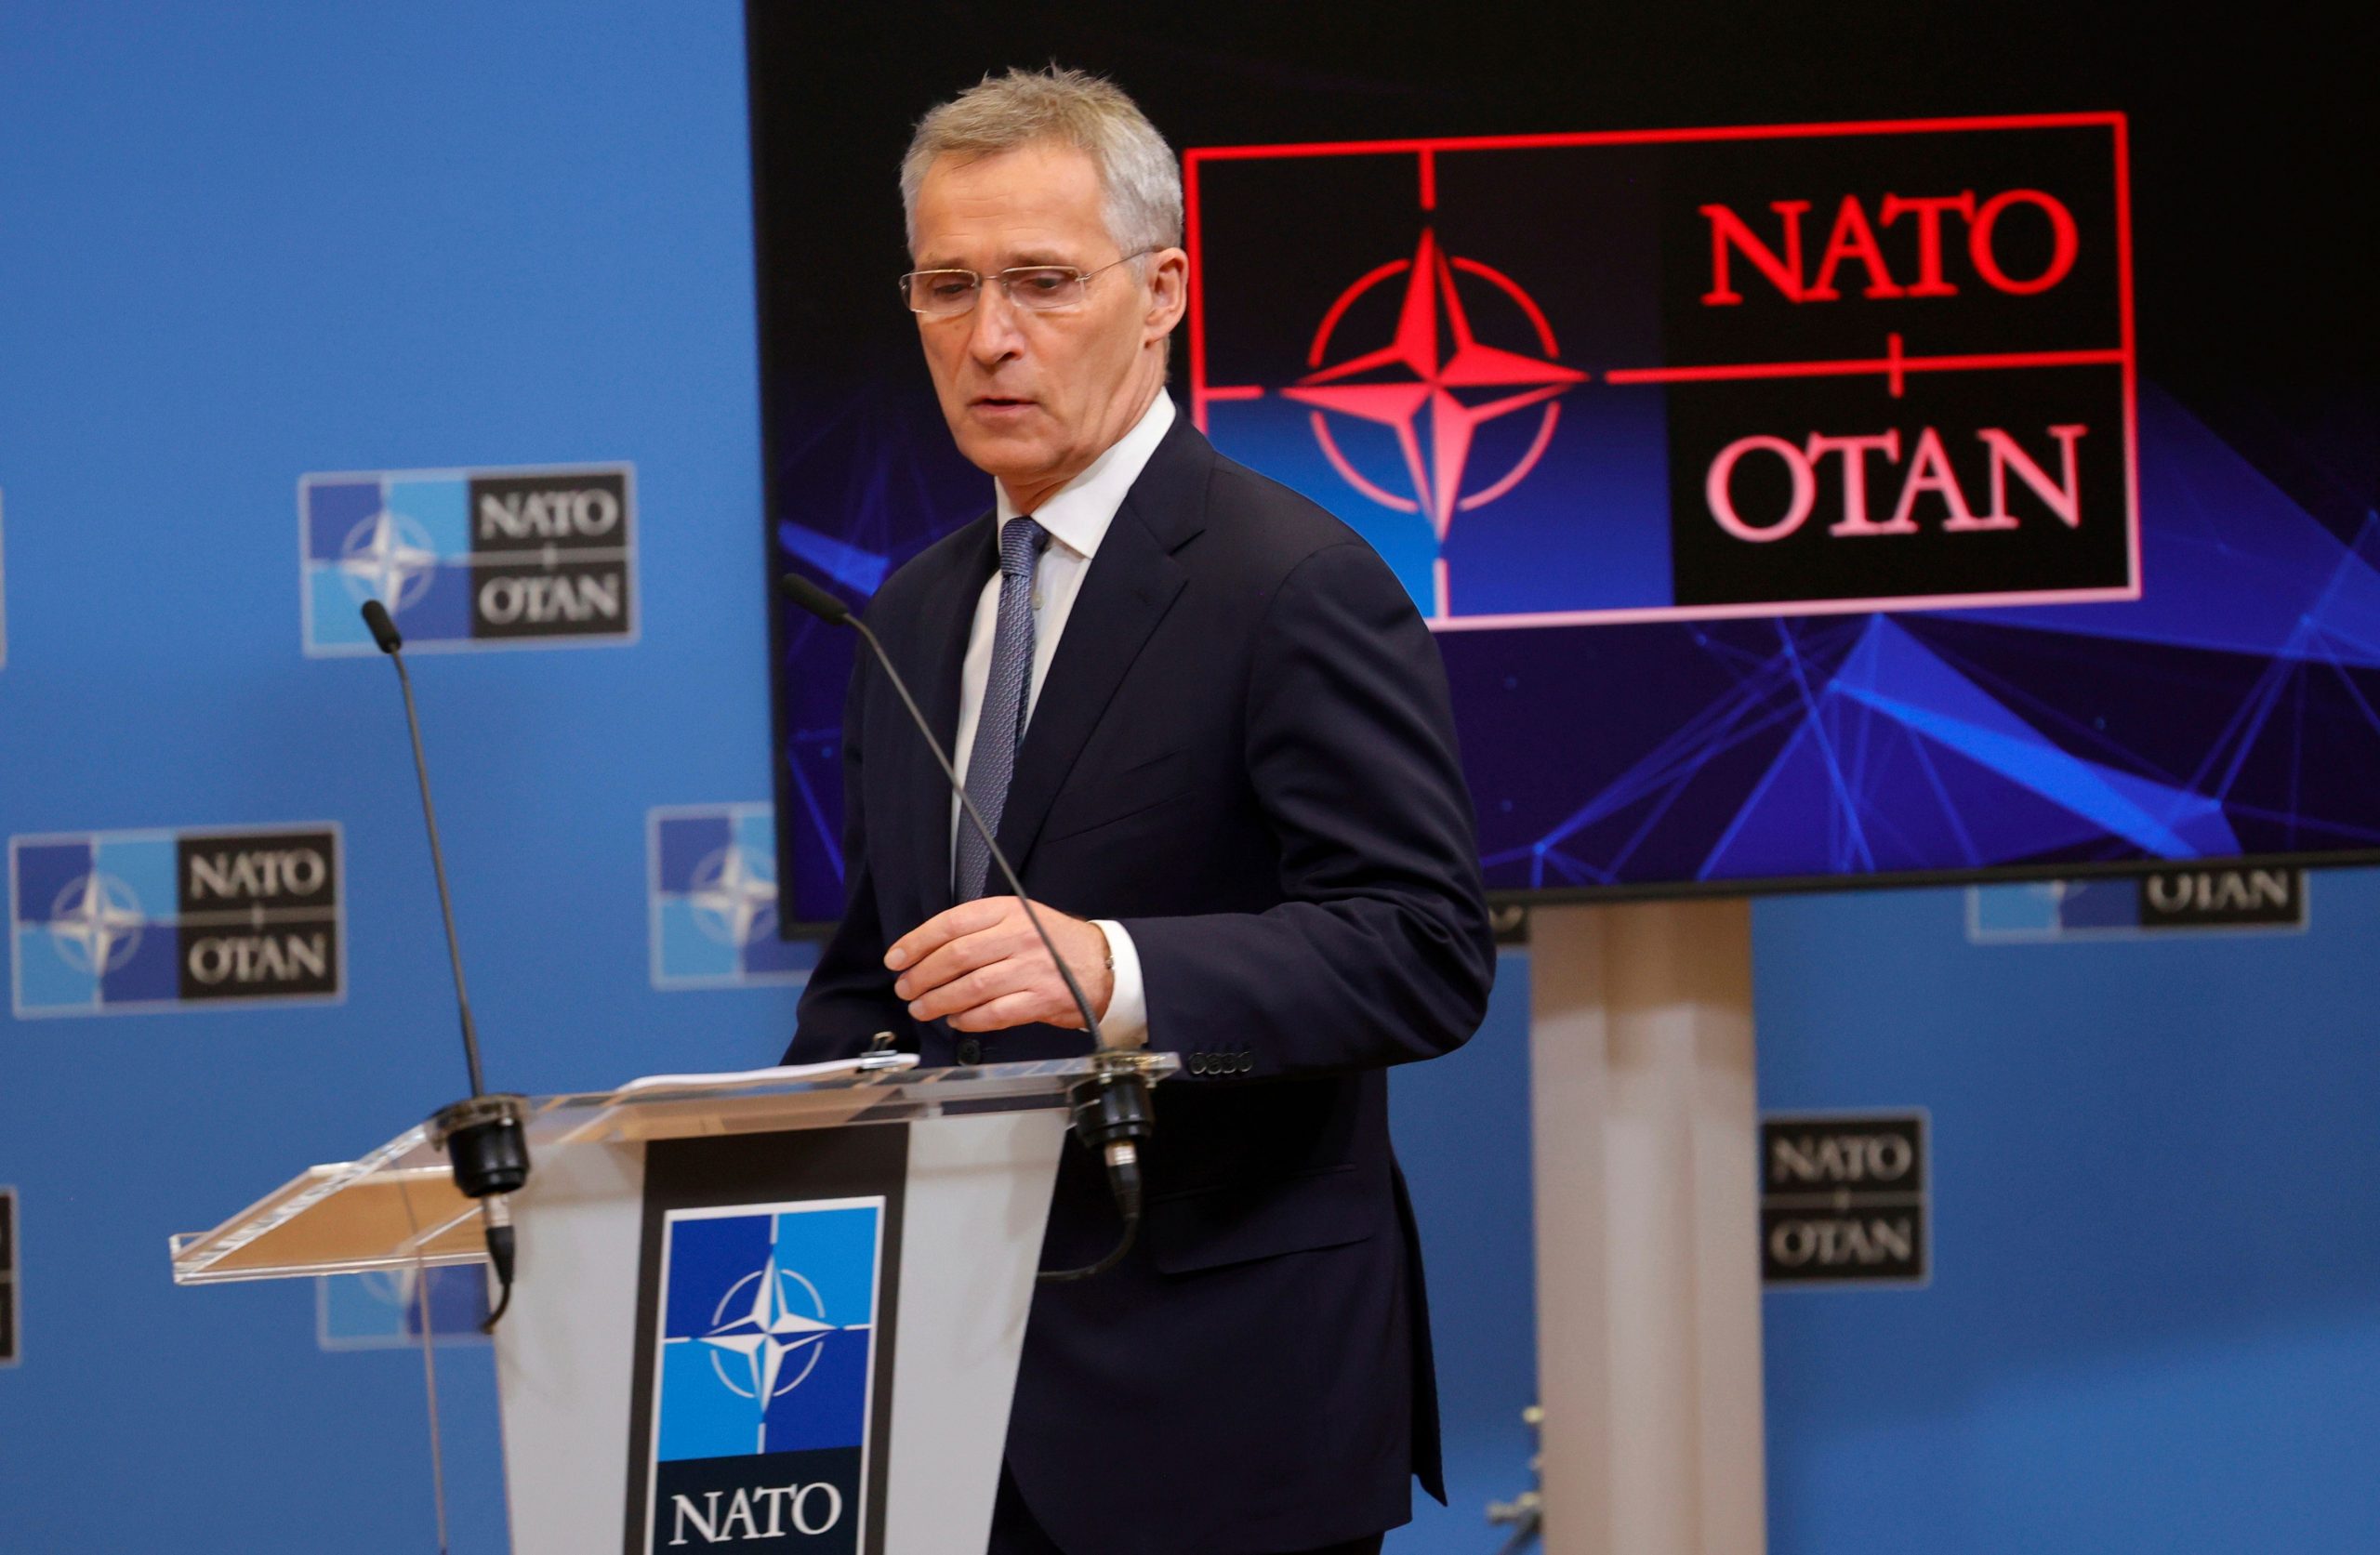 Russian troops ‘not withdrawing but repositioning’ in Ukraine: NATO